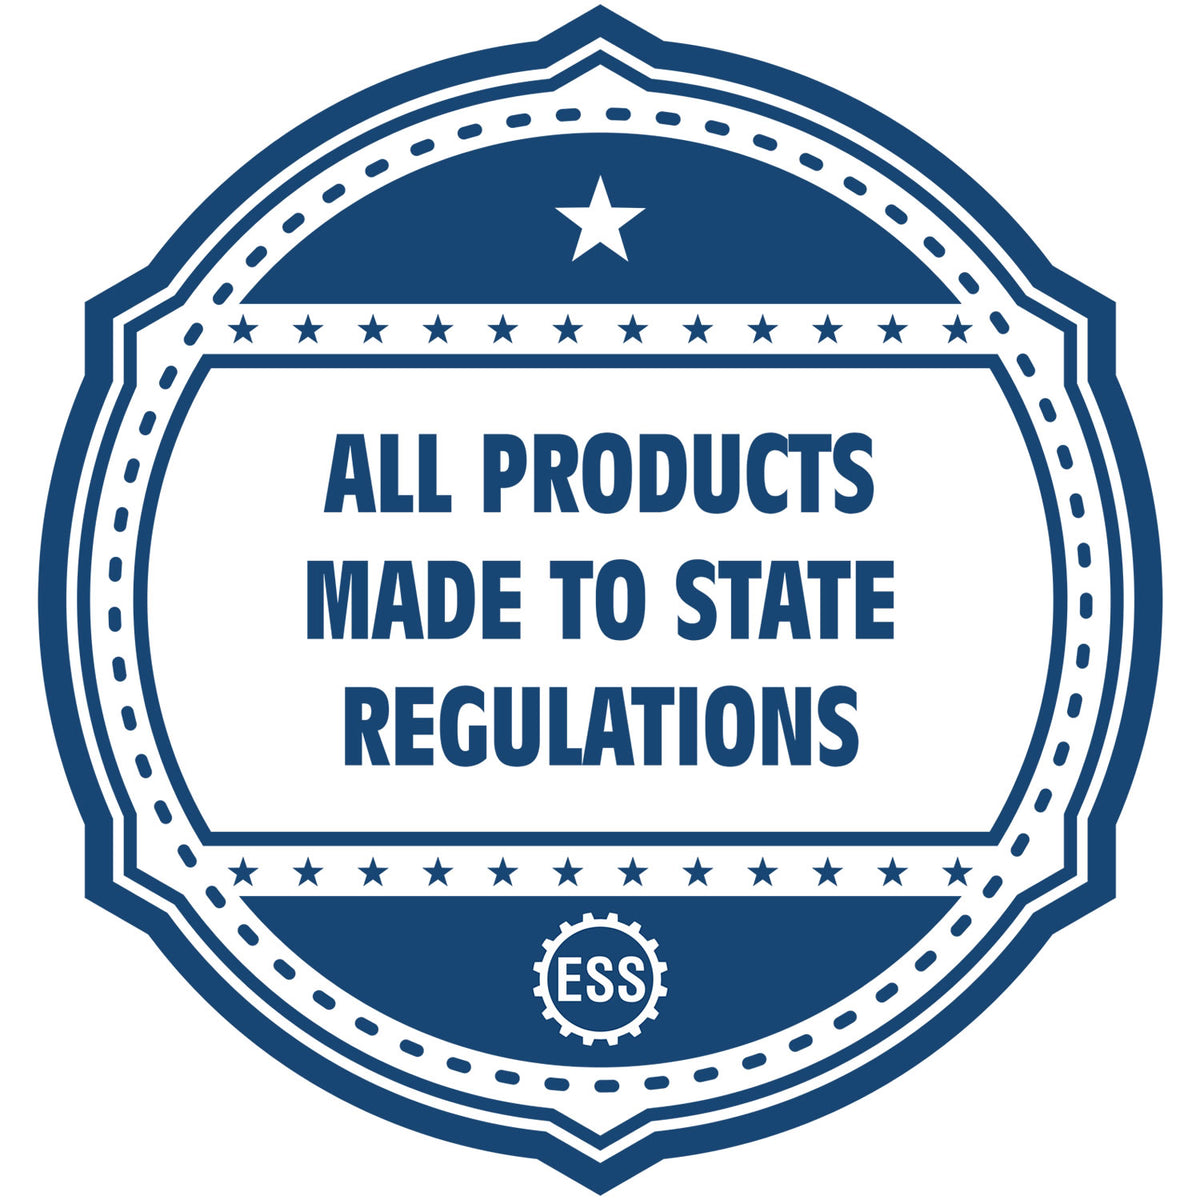 An icon or badge element for the Soft Pocket South Carolina Landscape Architect Embosser showing that this product is made in compliance with state regulations.